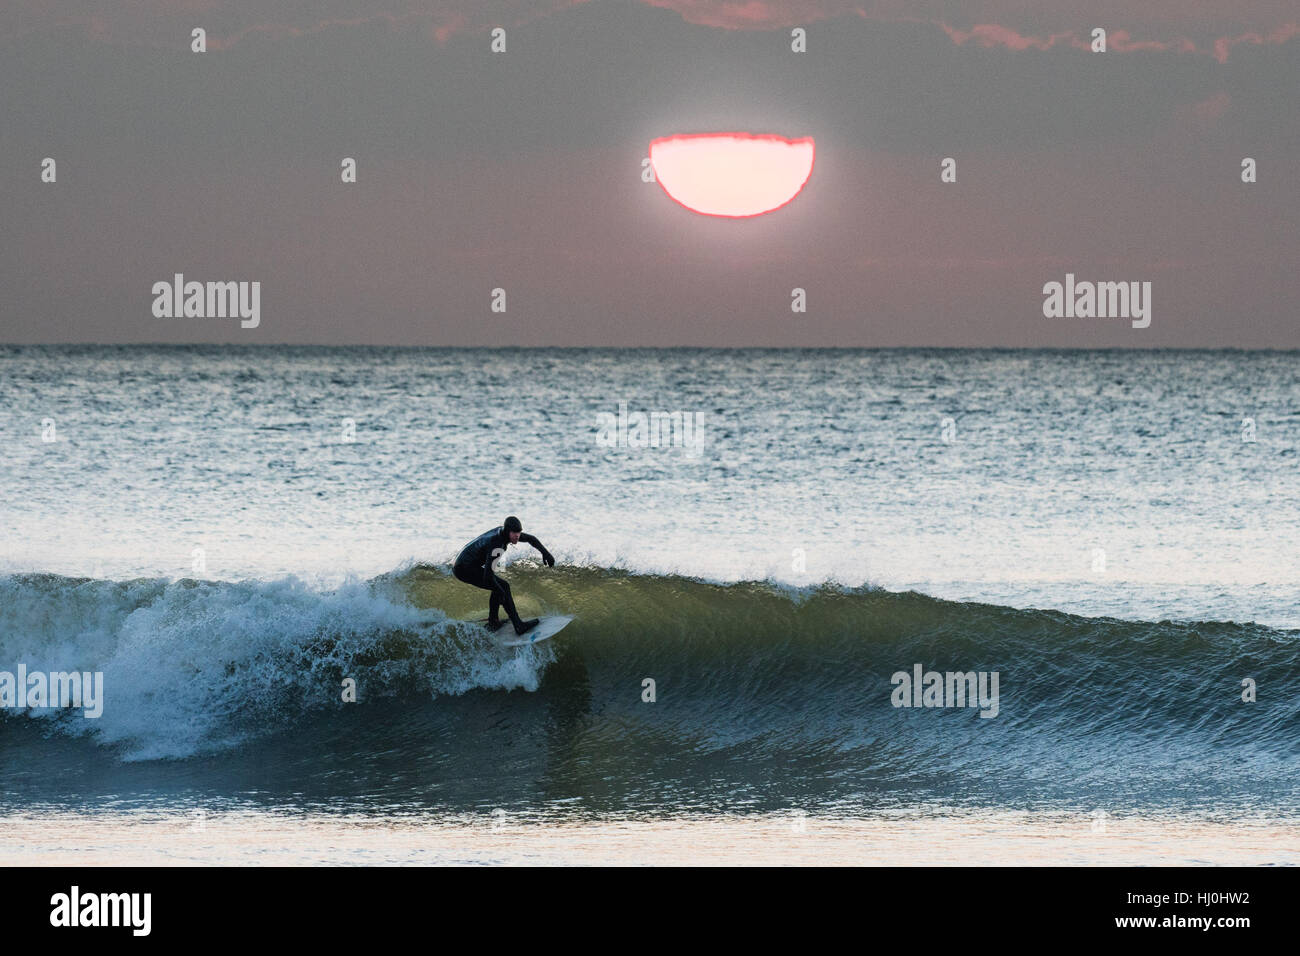 Aberystwyth Wales UK, Saturday 21 January 2017  UK weather: After a freezing cold night, with temperatures well below zero, surfers enjoy the waves at sunset at the end of a fine day of warm sunshine  in Aberystwyth on the Cardigan Bay coast of West Wales    photo  Keith Morris / Alamy Live News Stock Photo